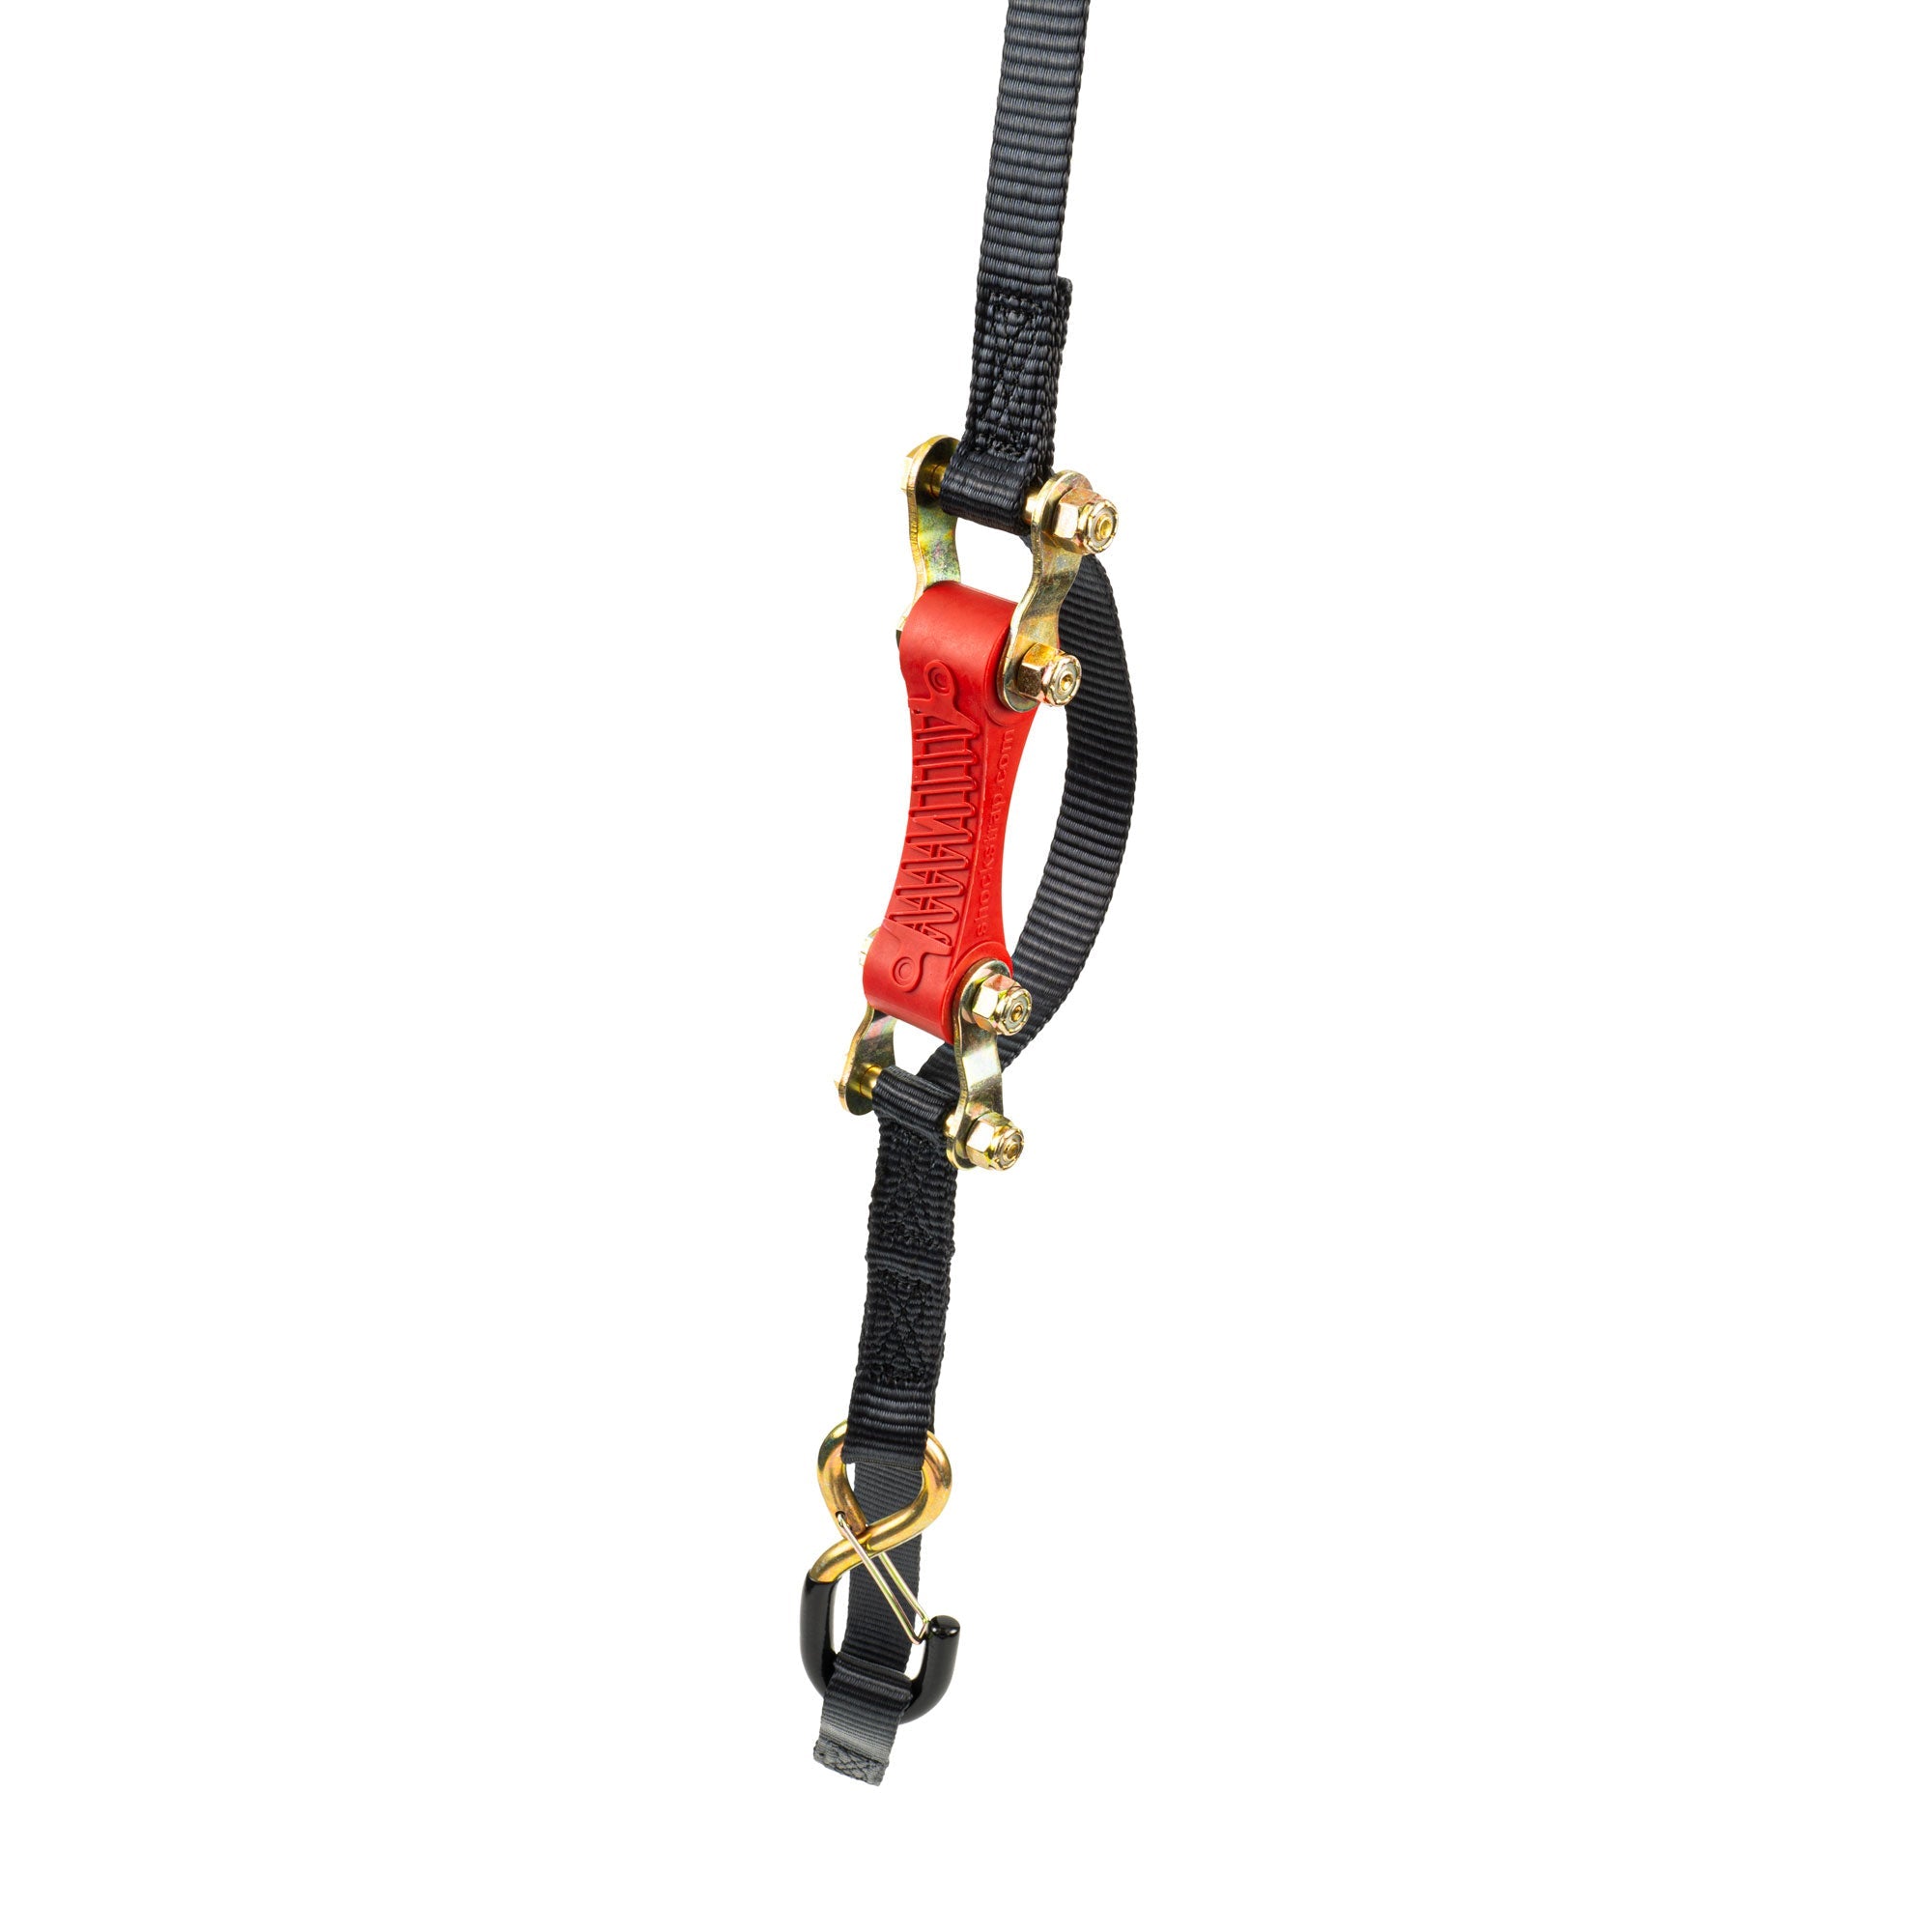 The Perfect Bungee AS36BK4PKP Strap Adjustable Bungee, Black